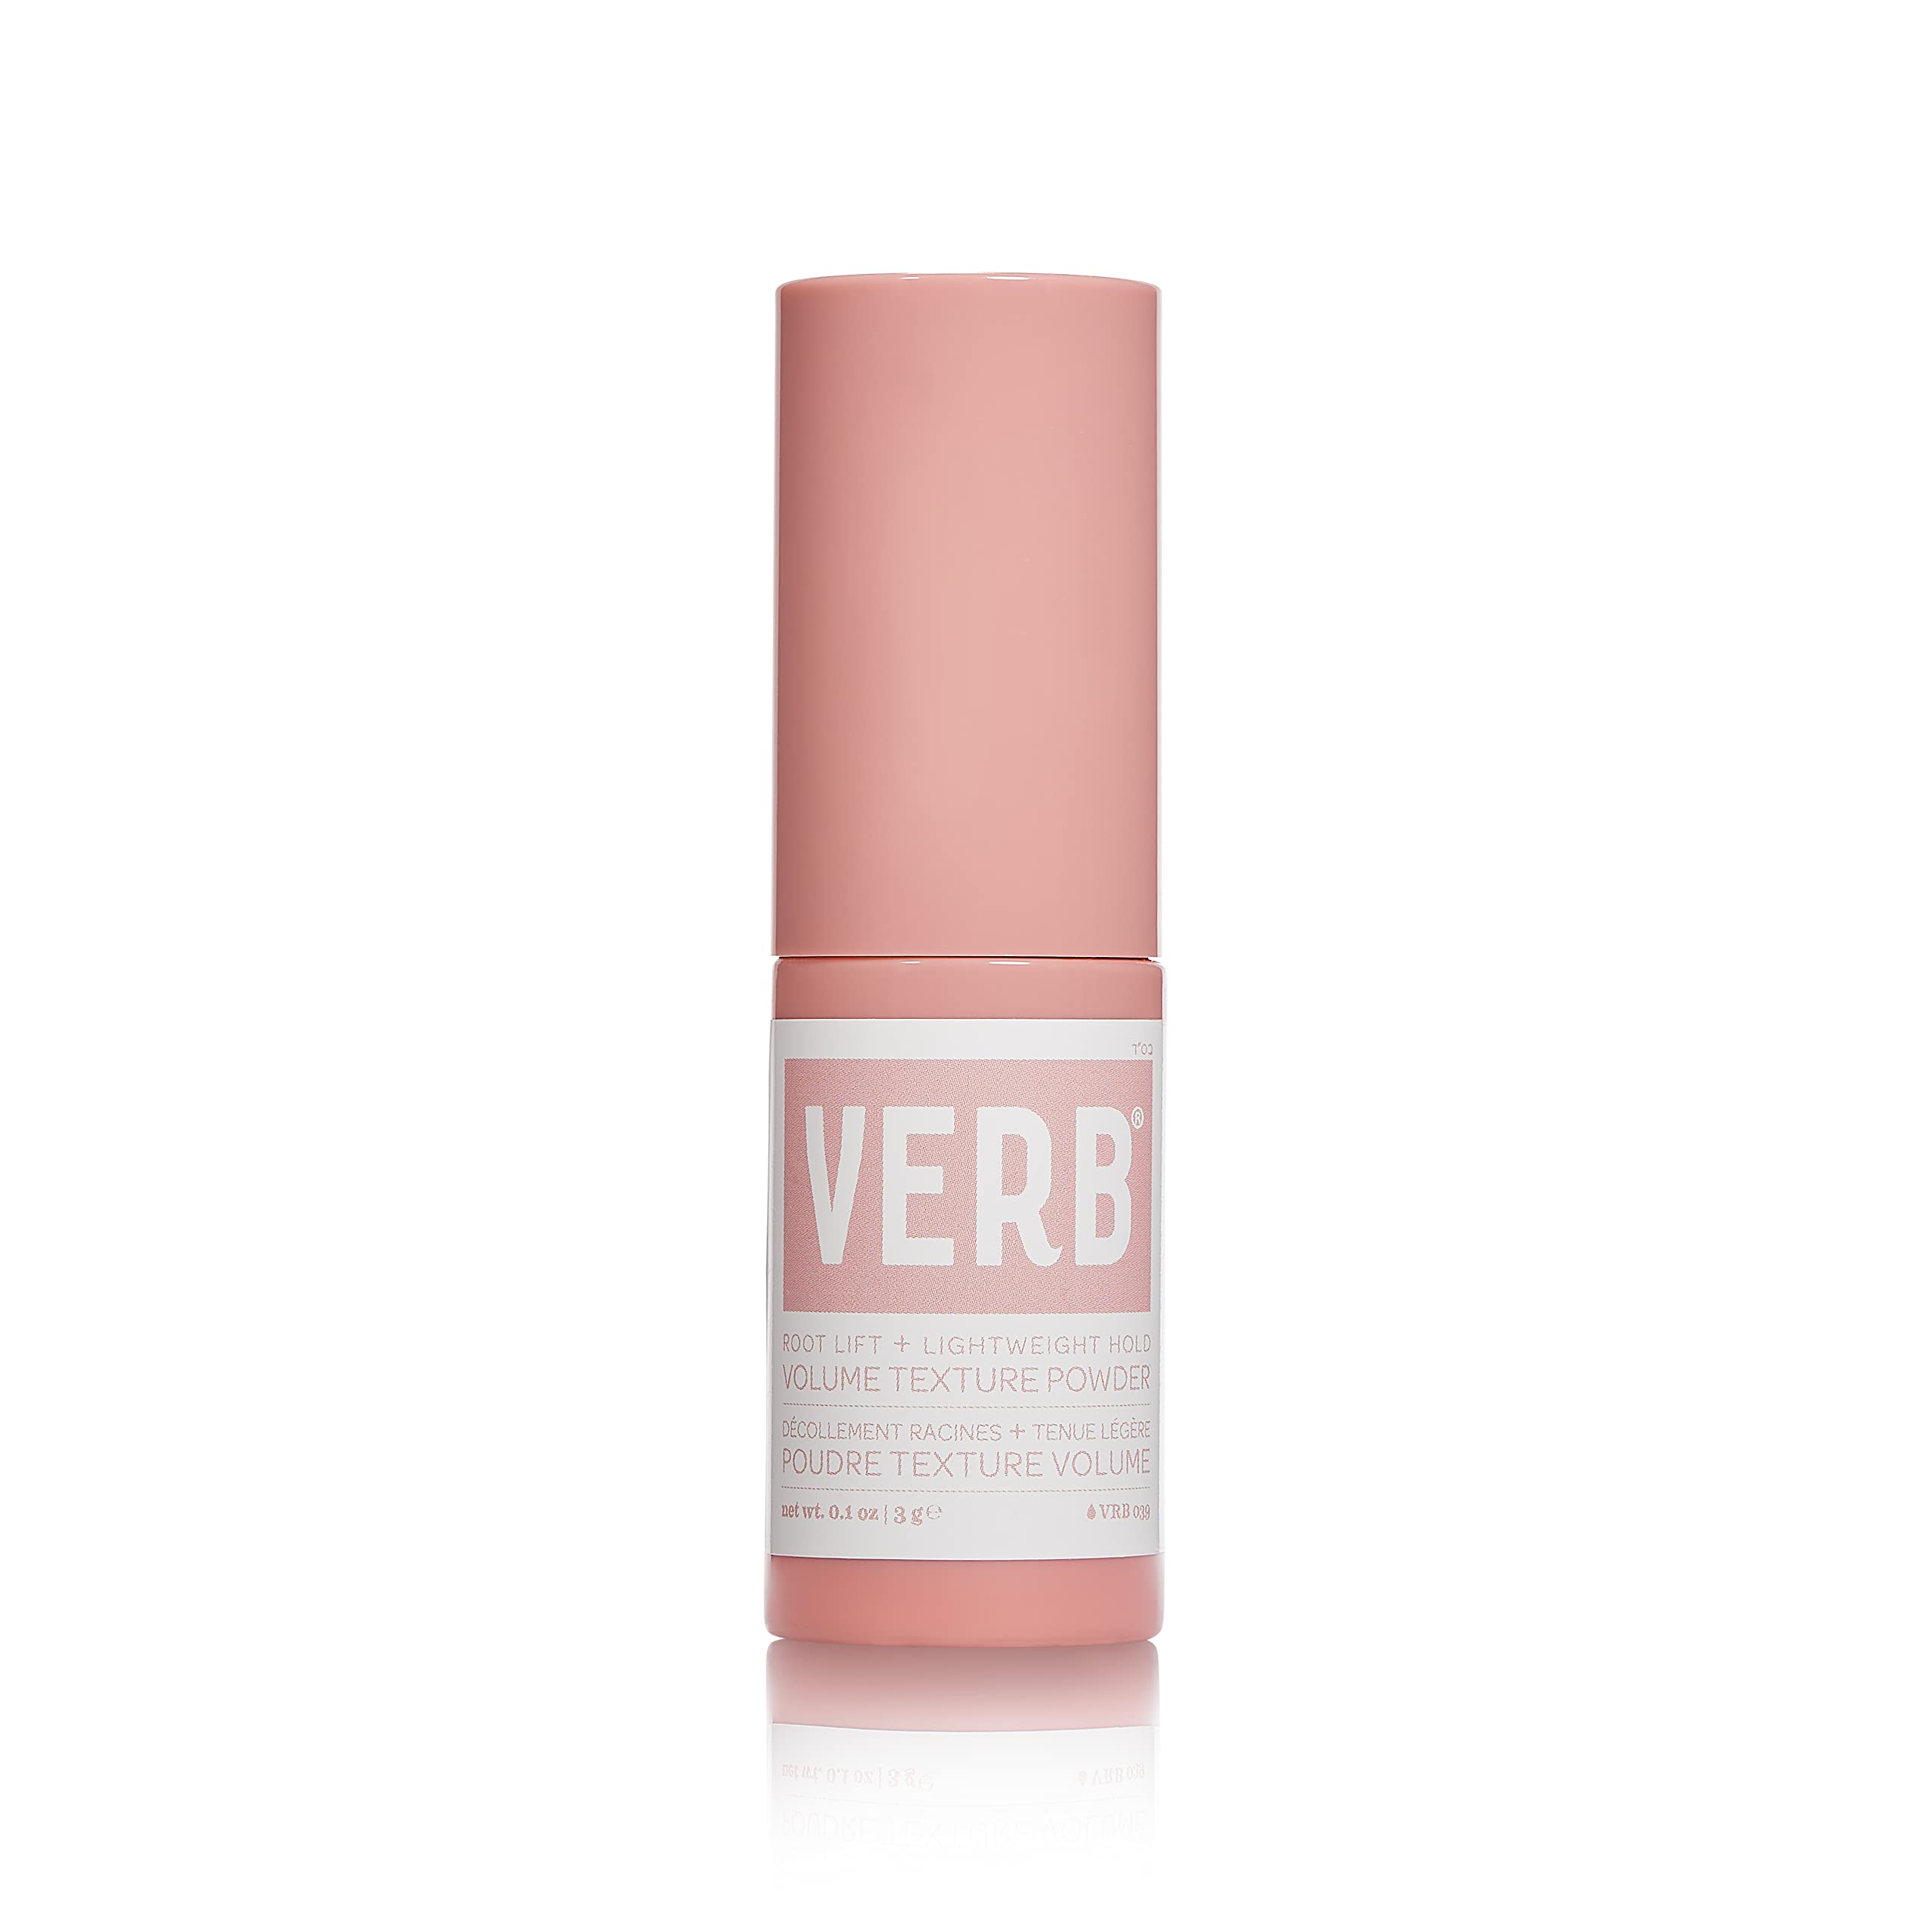 VERB Volume Texture Powder - Root Lift & Lightweight Hold - Volumizing & Texturizing Dry Powder for Full, Lifted Styles - Vegan Amplifying Powder for Fine or Flat Hair With No Harmful Sulfates 0.1 oz